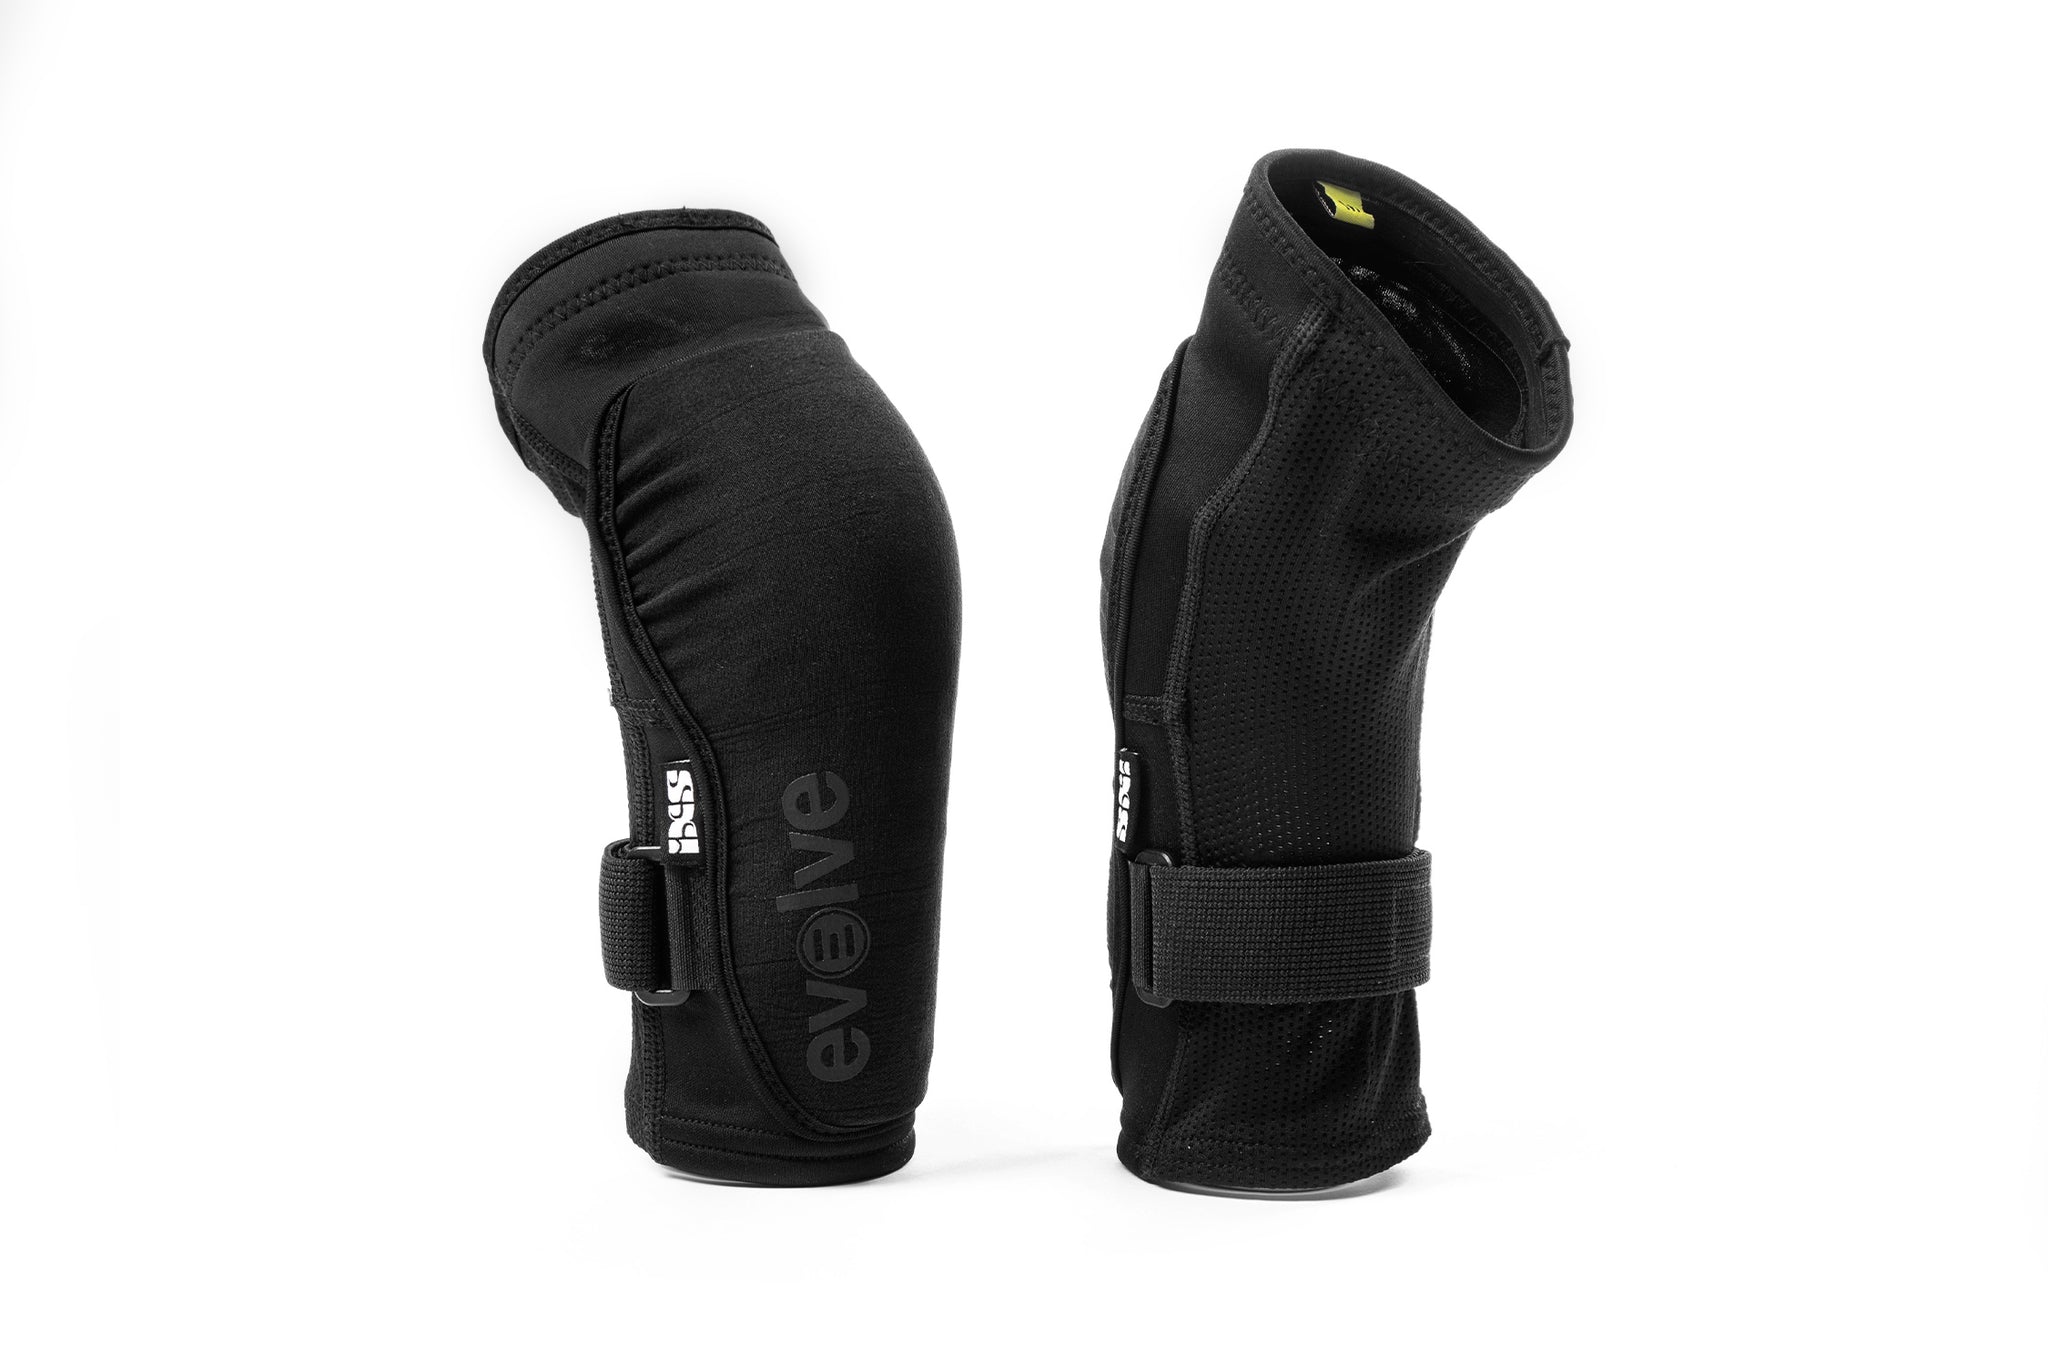 Evolve iXS Safety Guards | Elbow Pads